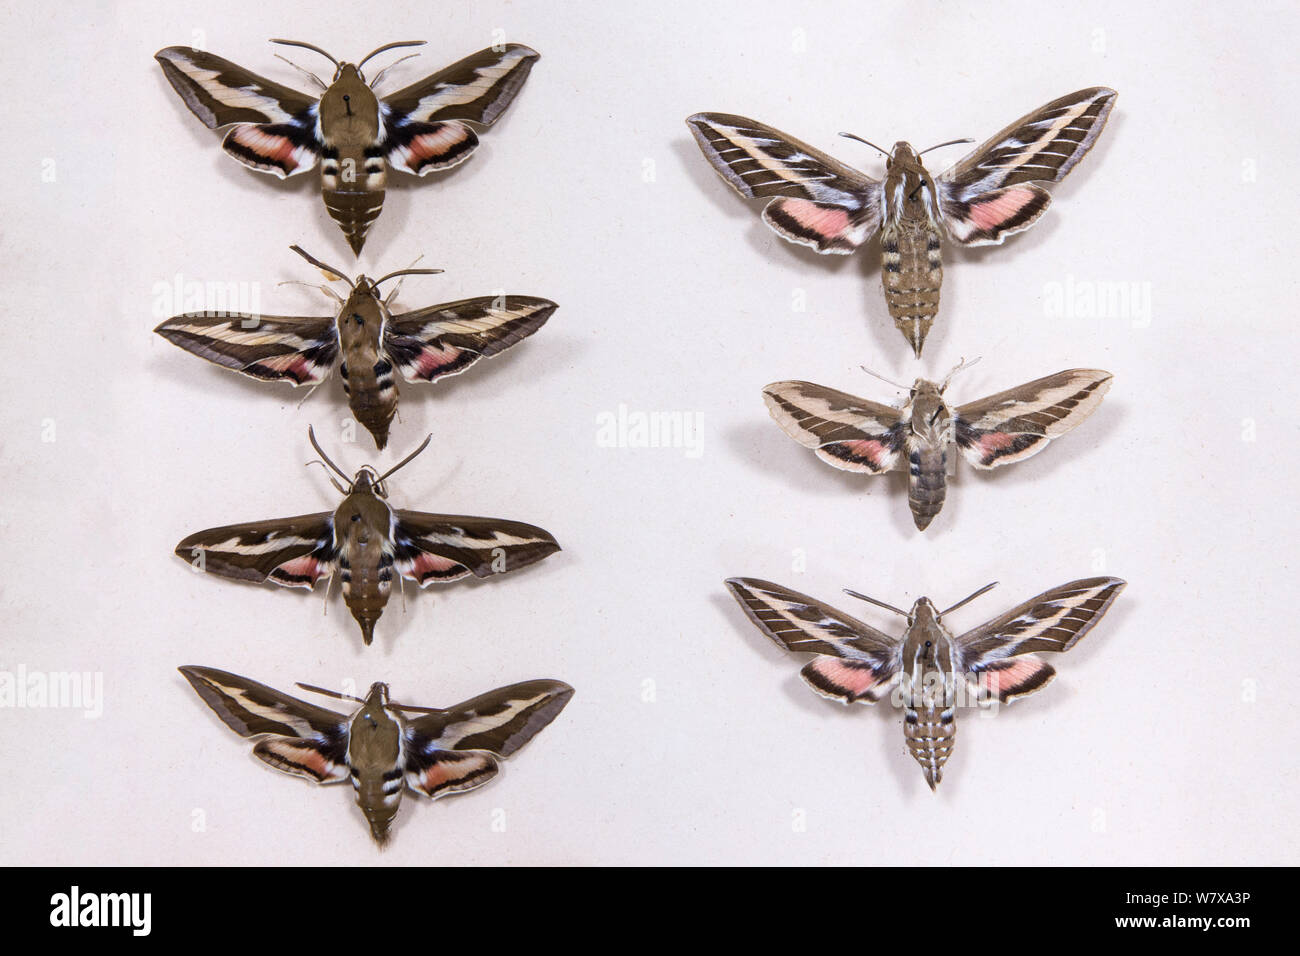 Bedstraw Hawkmoth (Hyles gallii) museum specimens showing variation in size and colouration, Tyne and Wear Archives and Museums Stock Photo